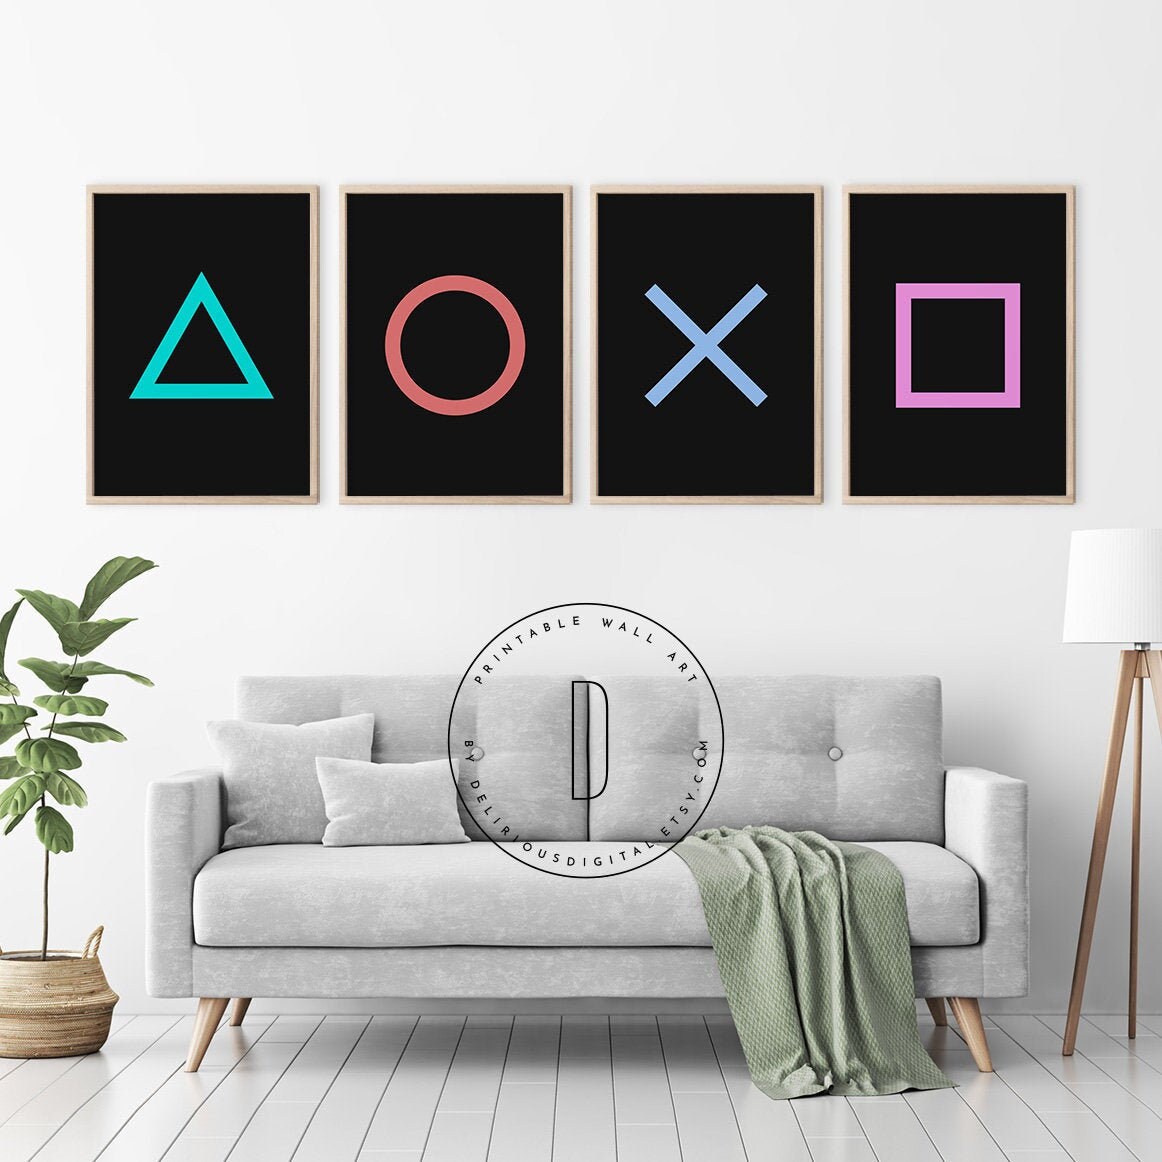 Shop CRASPIRE Wall Art Print Game Sign Art Painting Set of 6 Paper Level Up  Wall Decor Colorful Wall Art Poster for Gamer Room Decor Living Room  Bedroom Decor for Jewelry Making 